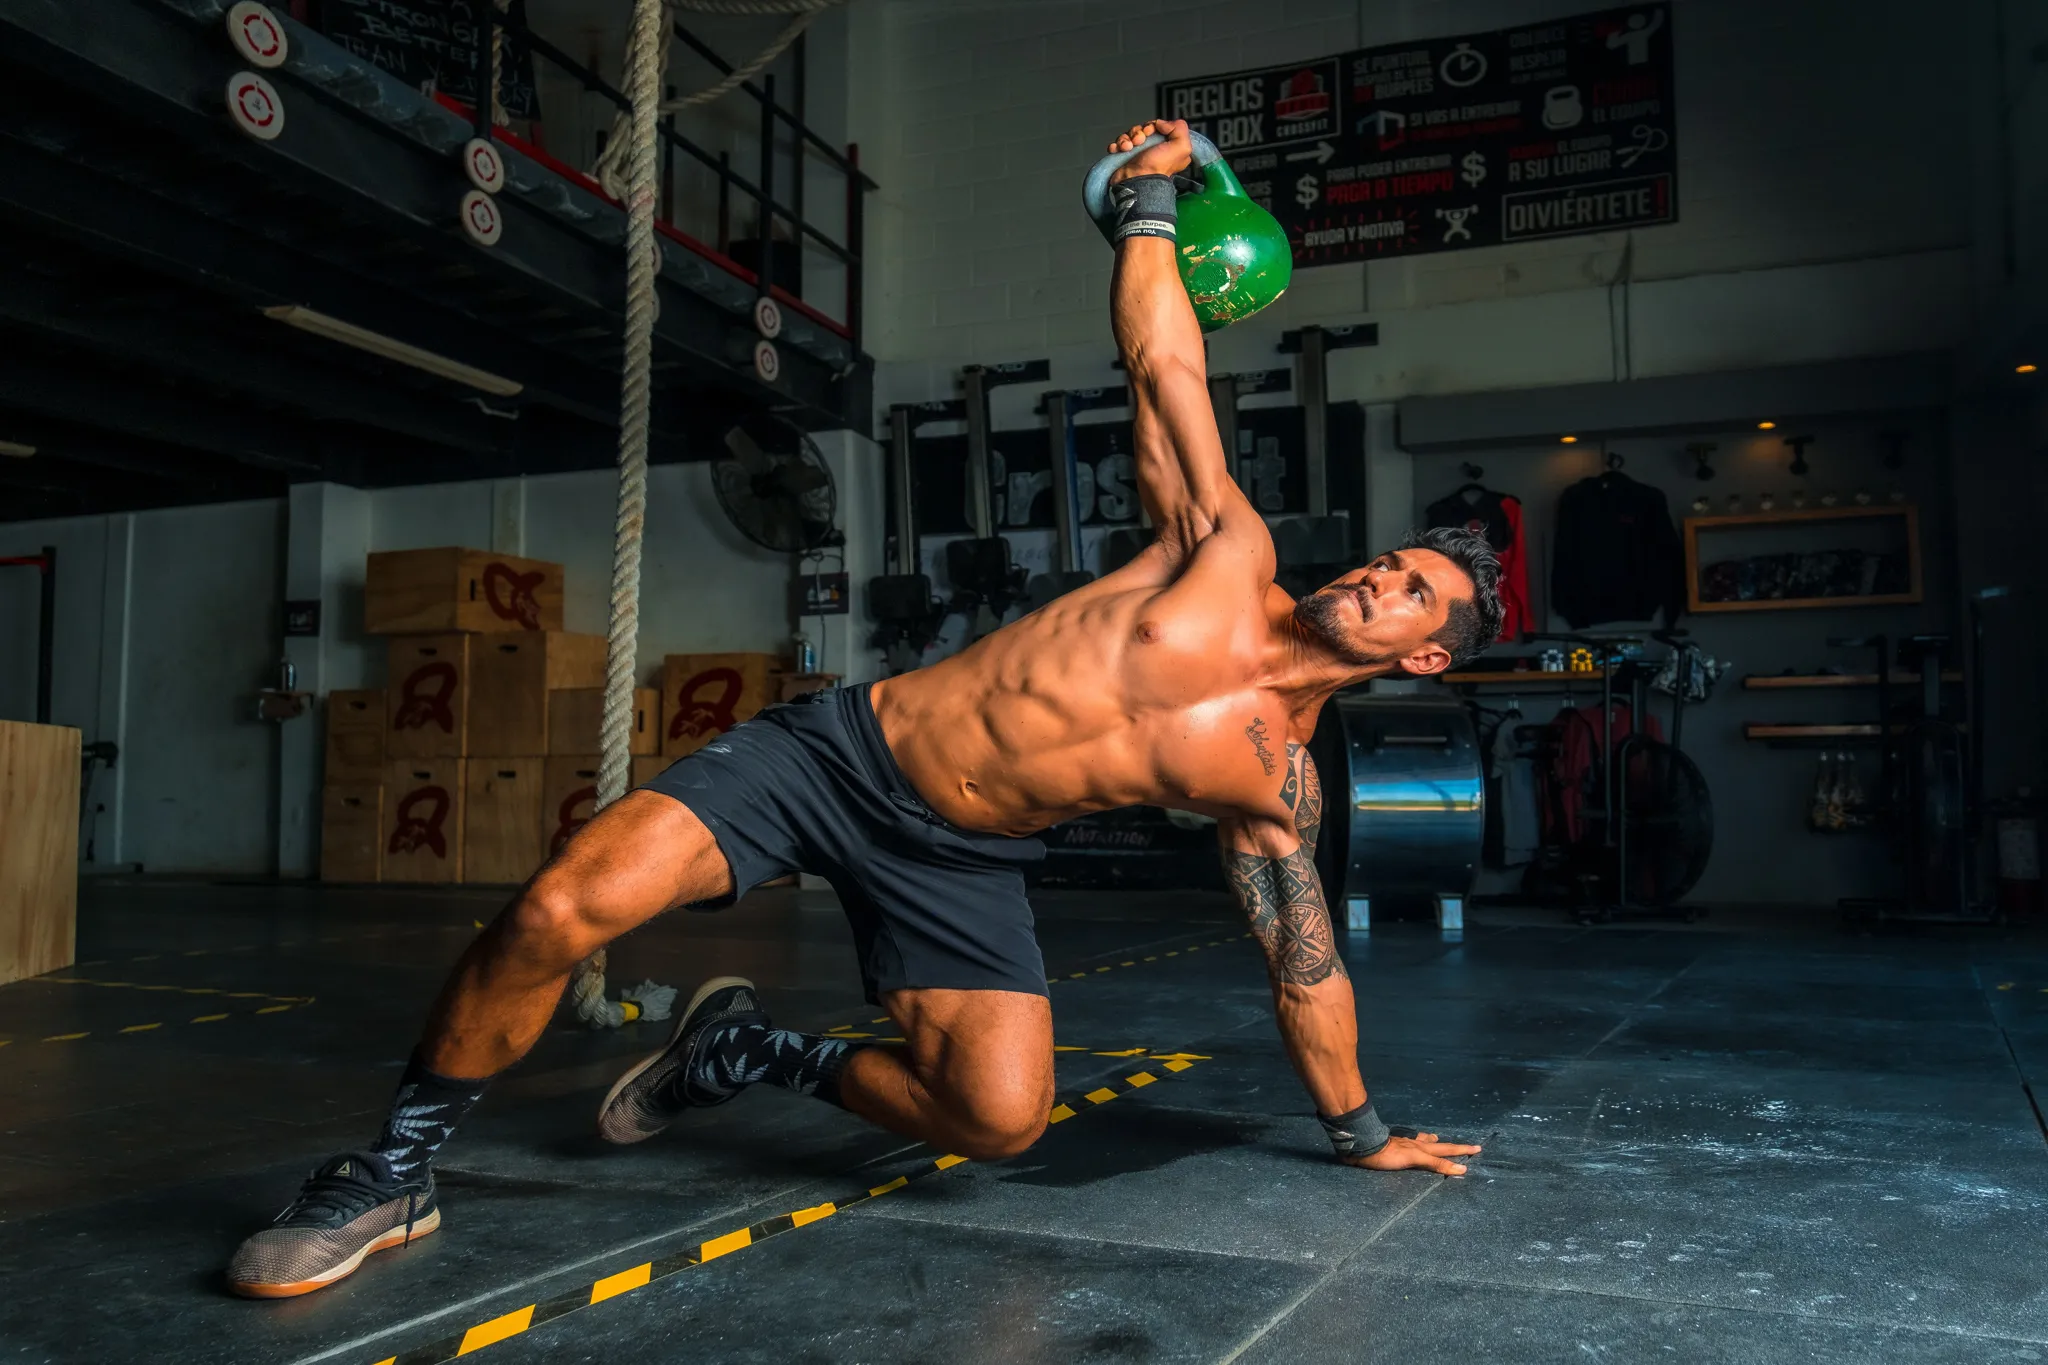 How To Do Burpees: The Beginner's Guide